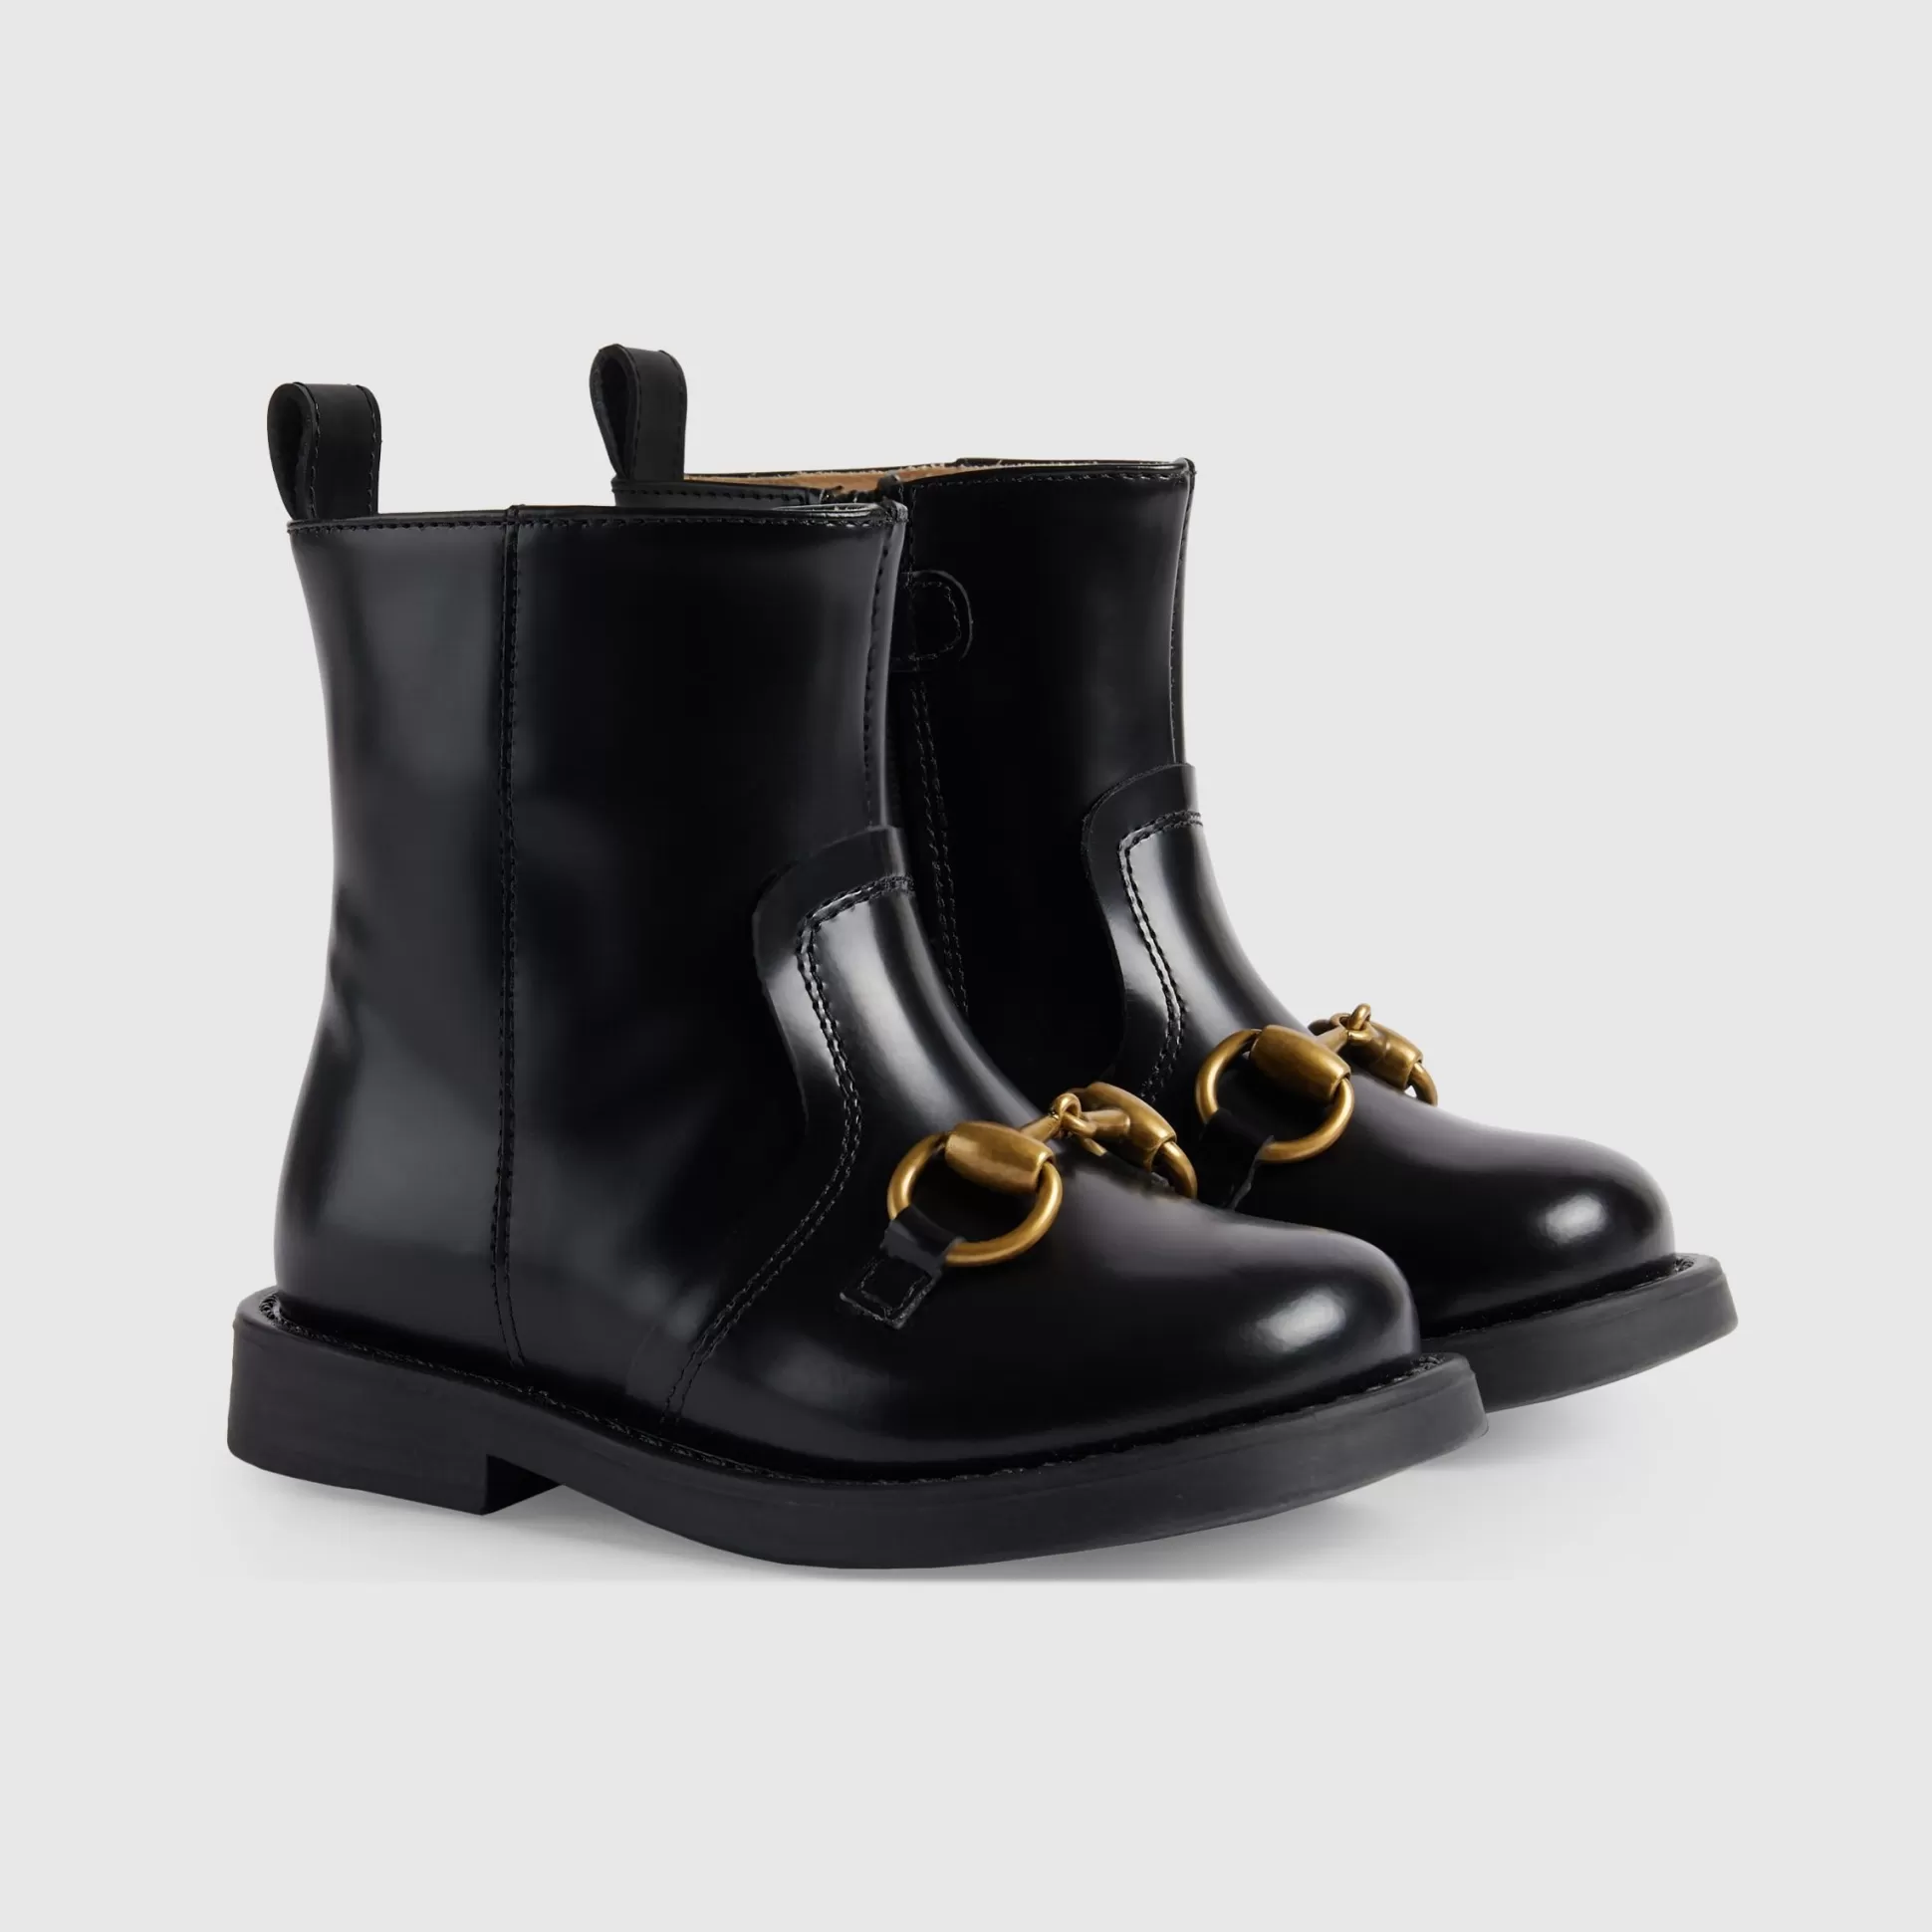 GUCCI Toddler Boots With Horsebit-Children Toddler Shoes (20-26)